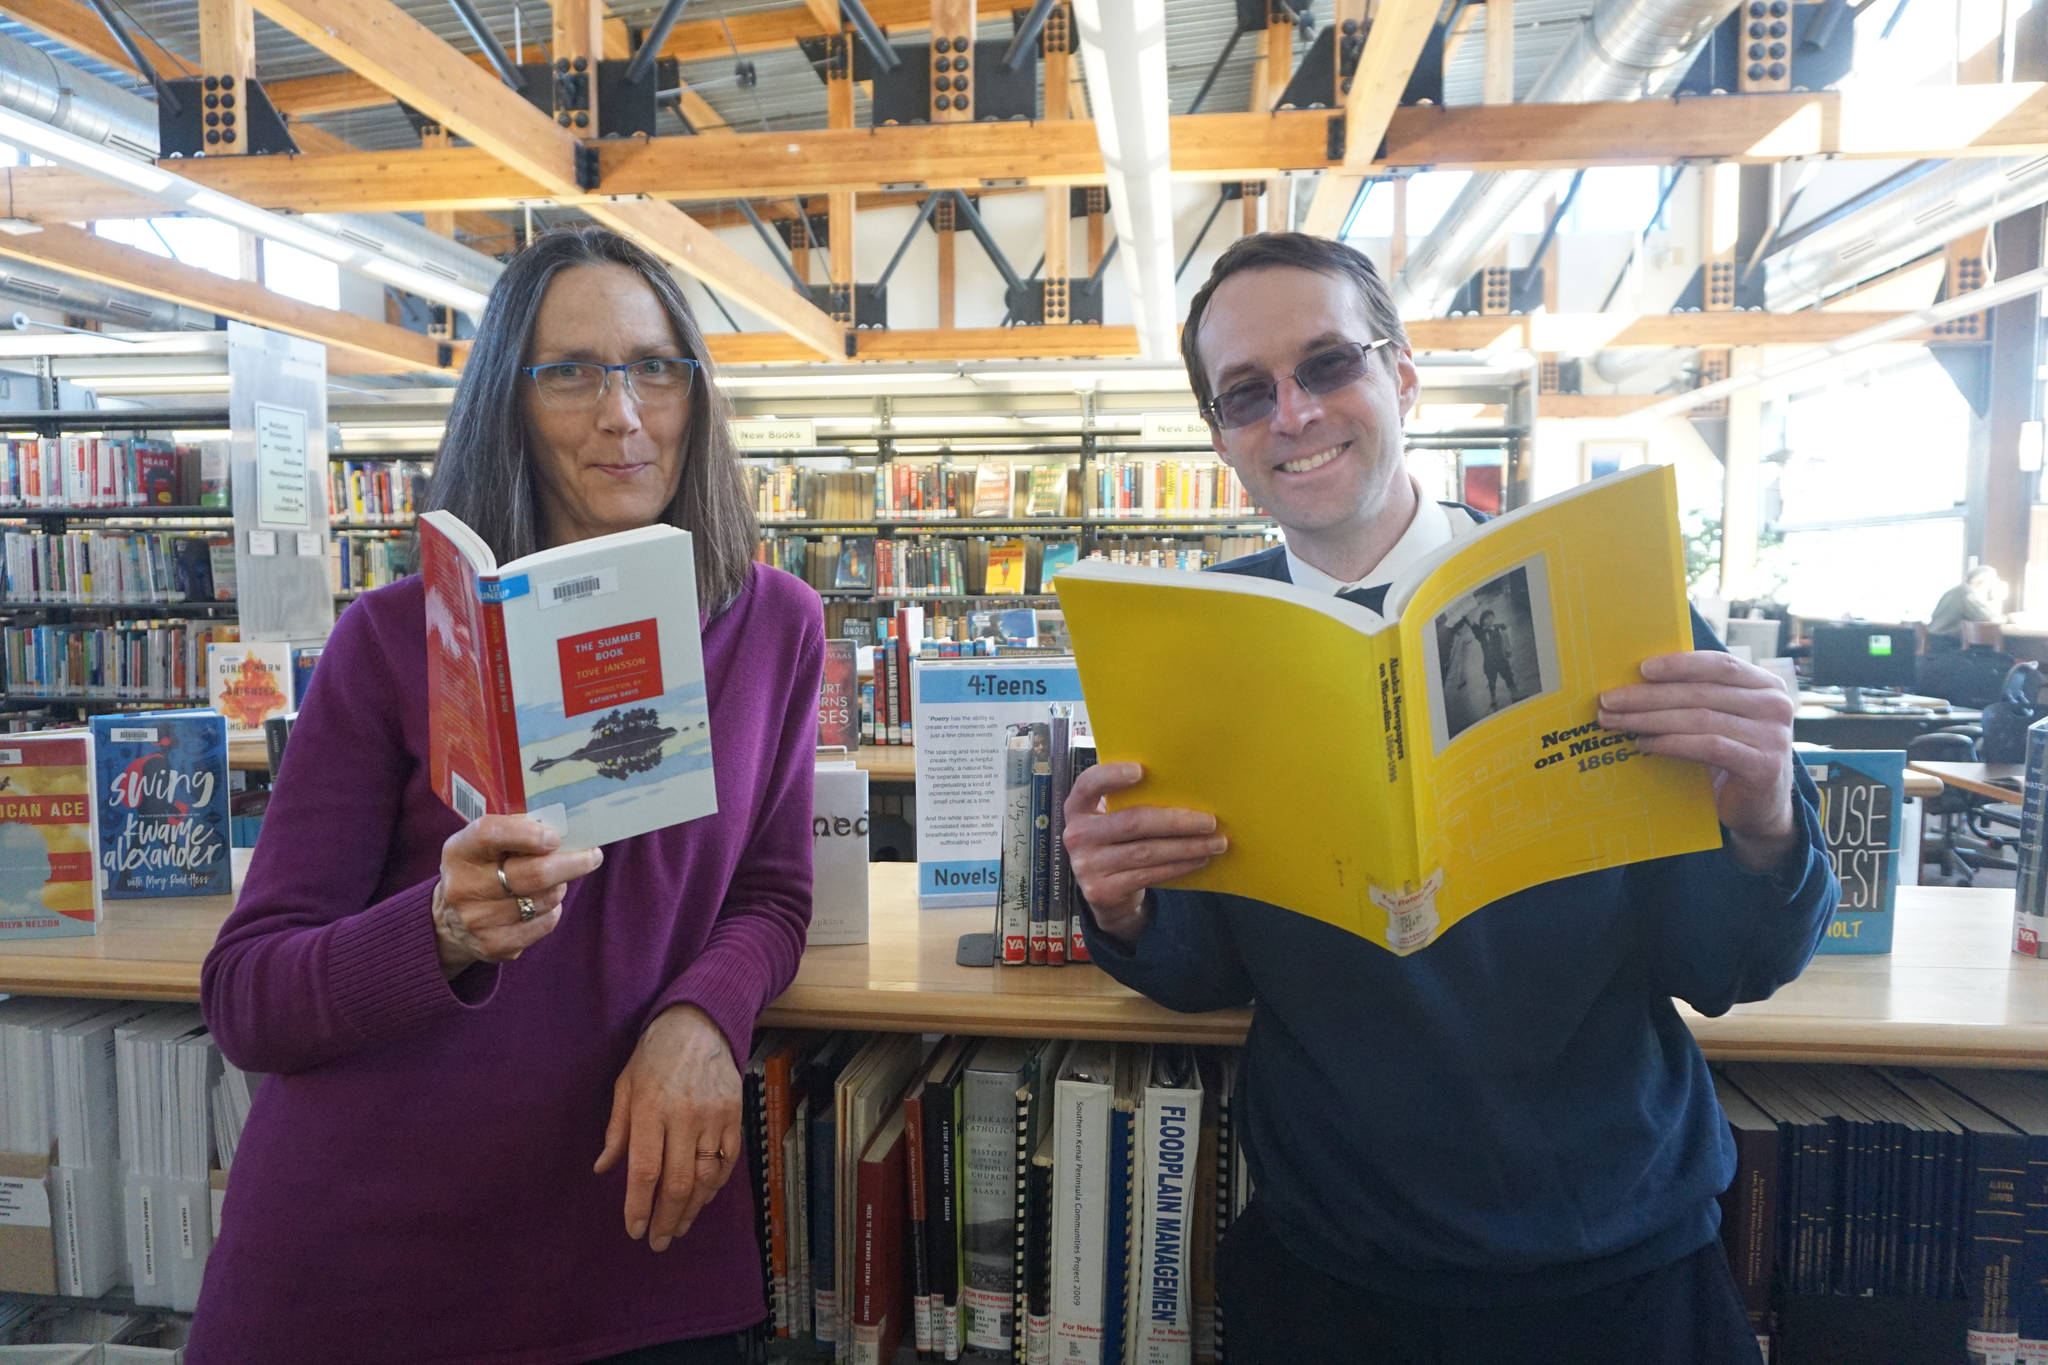 Homer Public Library Director Ann Dixon, left, poses for a photo with incoming Library Director David Berry, right, on April 15, 2019, at the library in Homer, Alaska. (Photo provided)